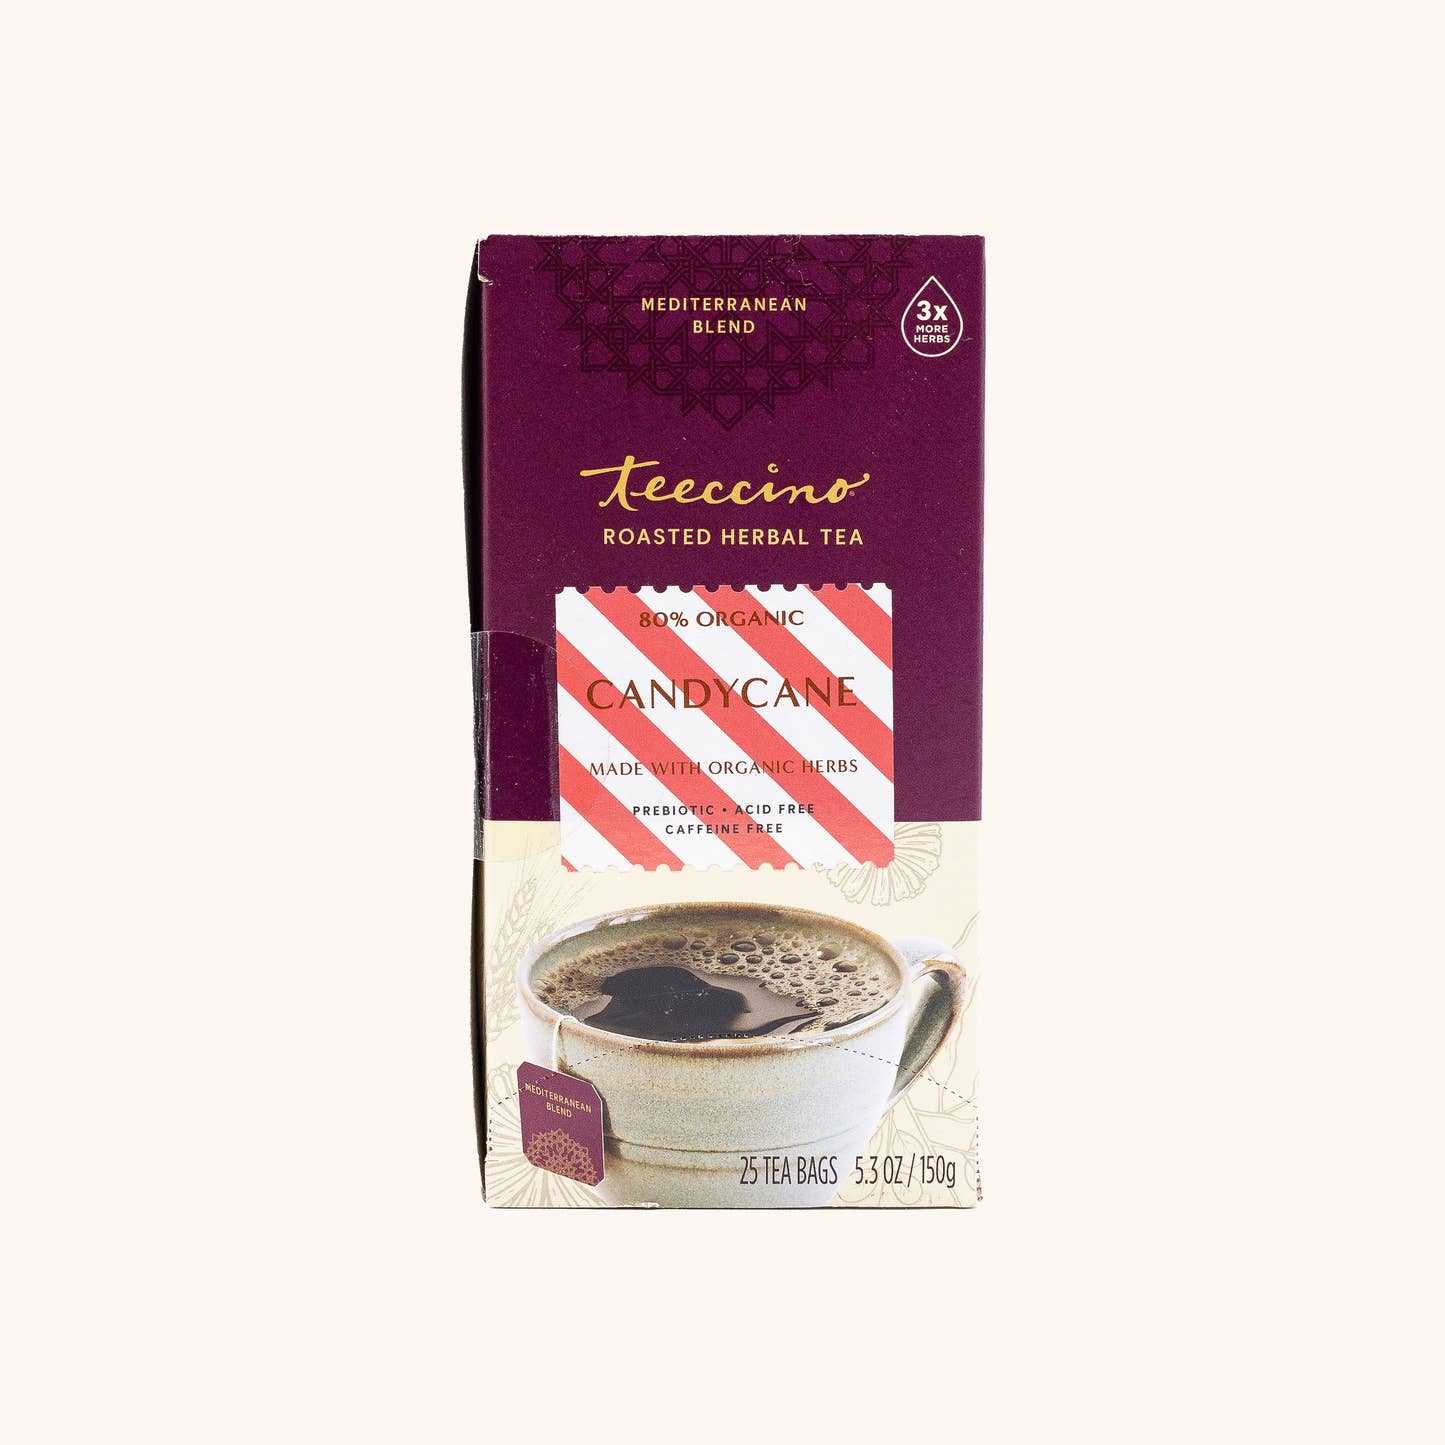 Candy Cane Chicory Herbal Tea by Teeccino box with tea bags